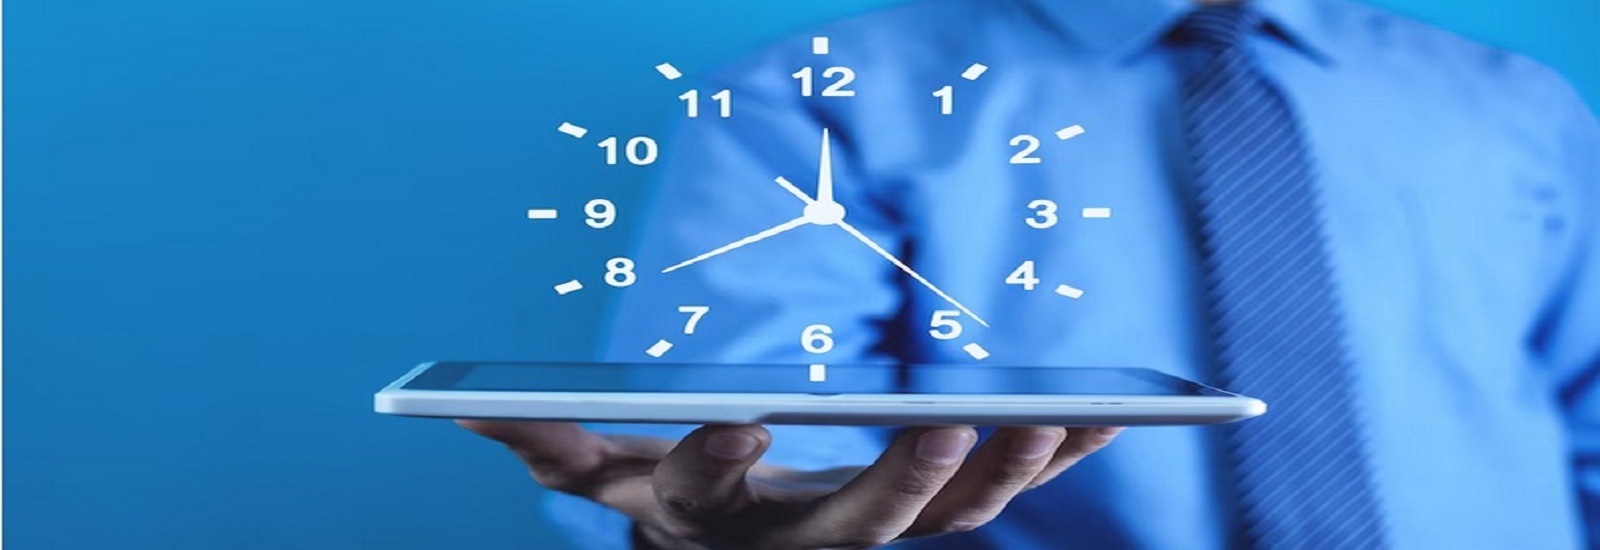 Mastering Your Productivity: The Art of Smart Time Management Training